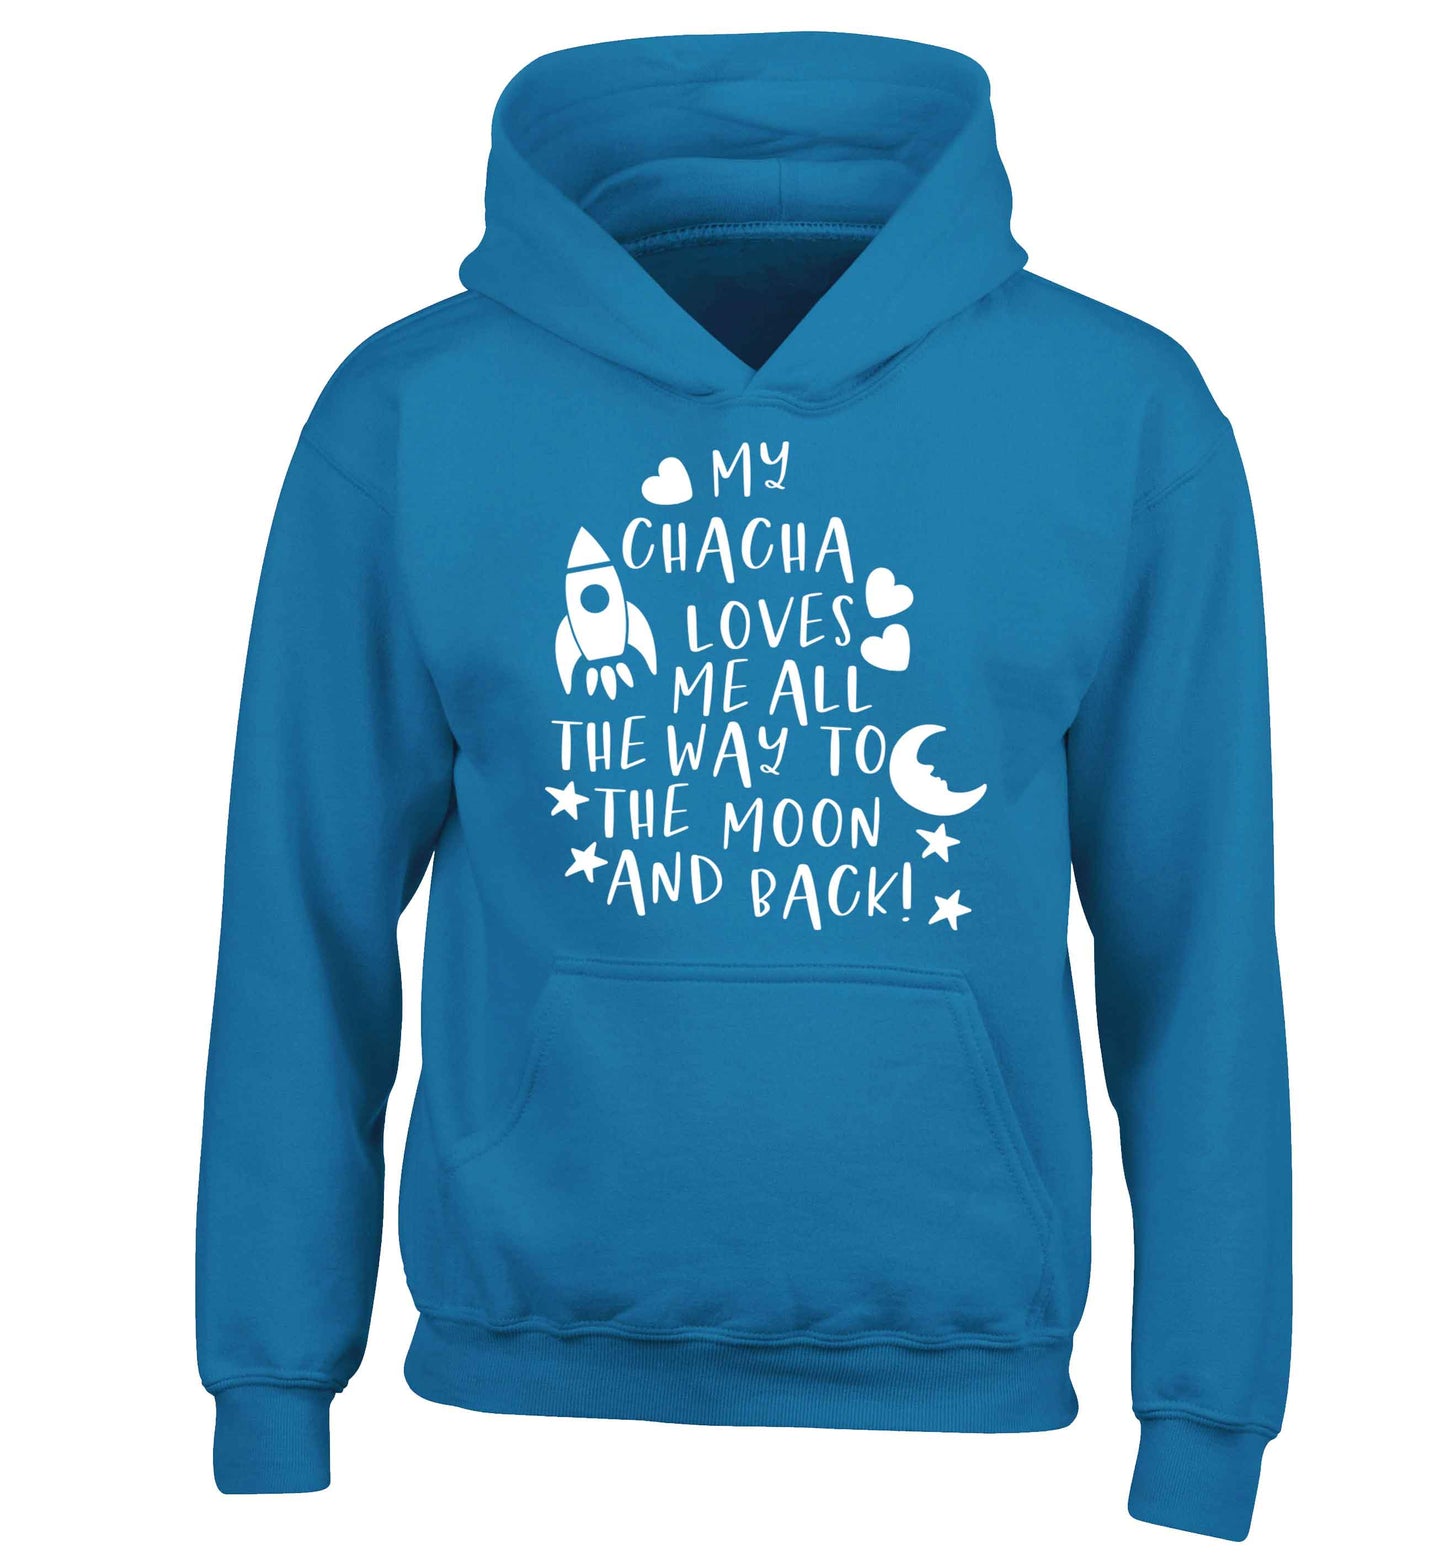 My chacha loves me all the way to the moon and back children's blue hoodie 12-13 Years